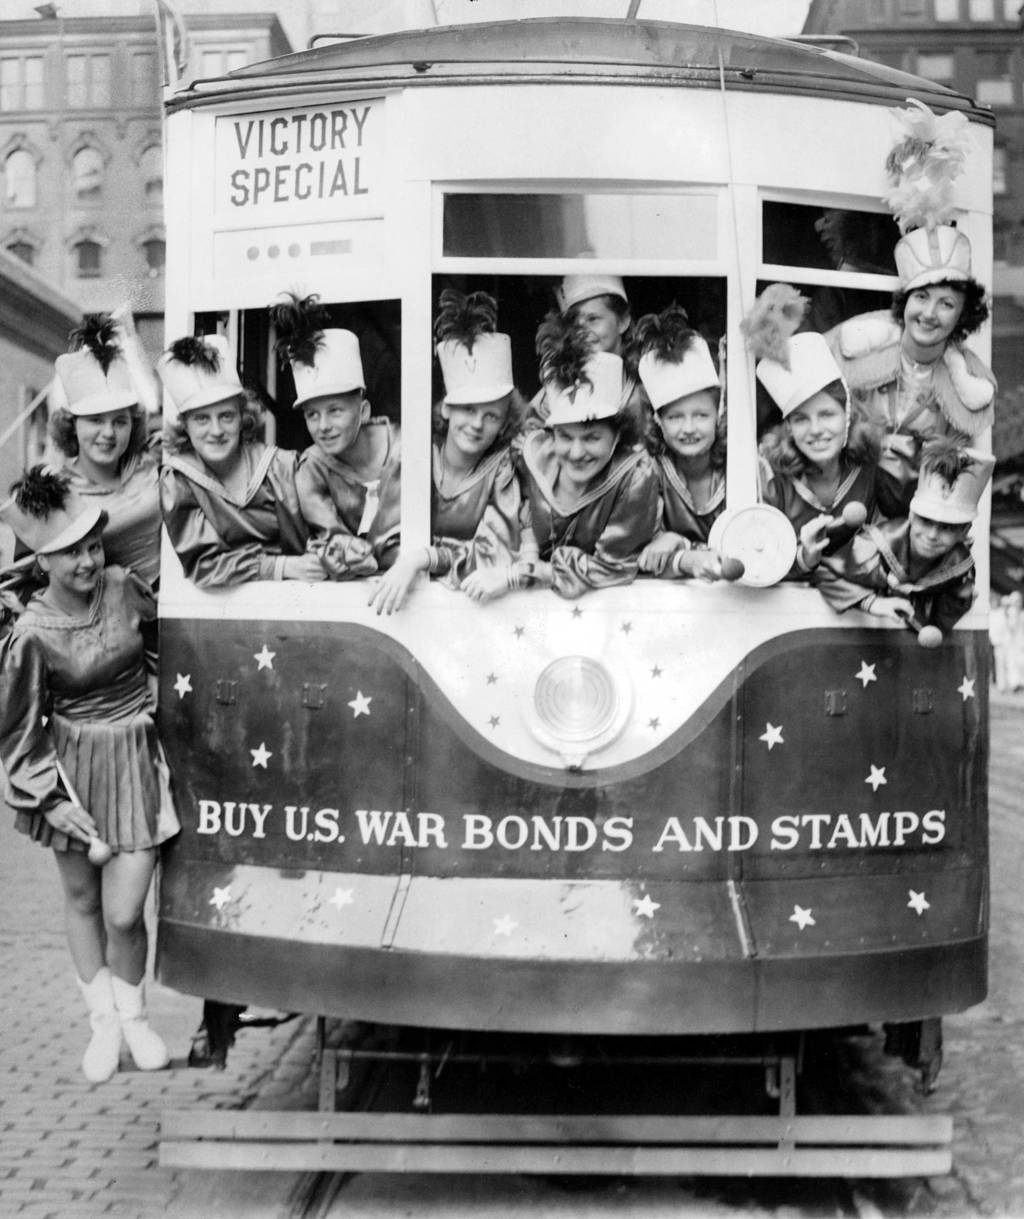 In July 1942, majorettes filled a street car painted red, white and blue to promote the sale of war bonds and stamps during World War II. The car was to go into regular service the next day on the Broadway Line.